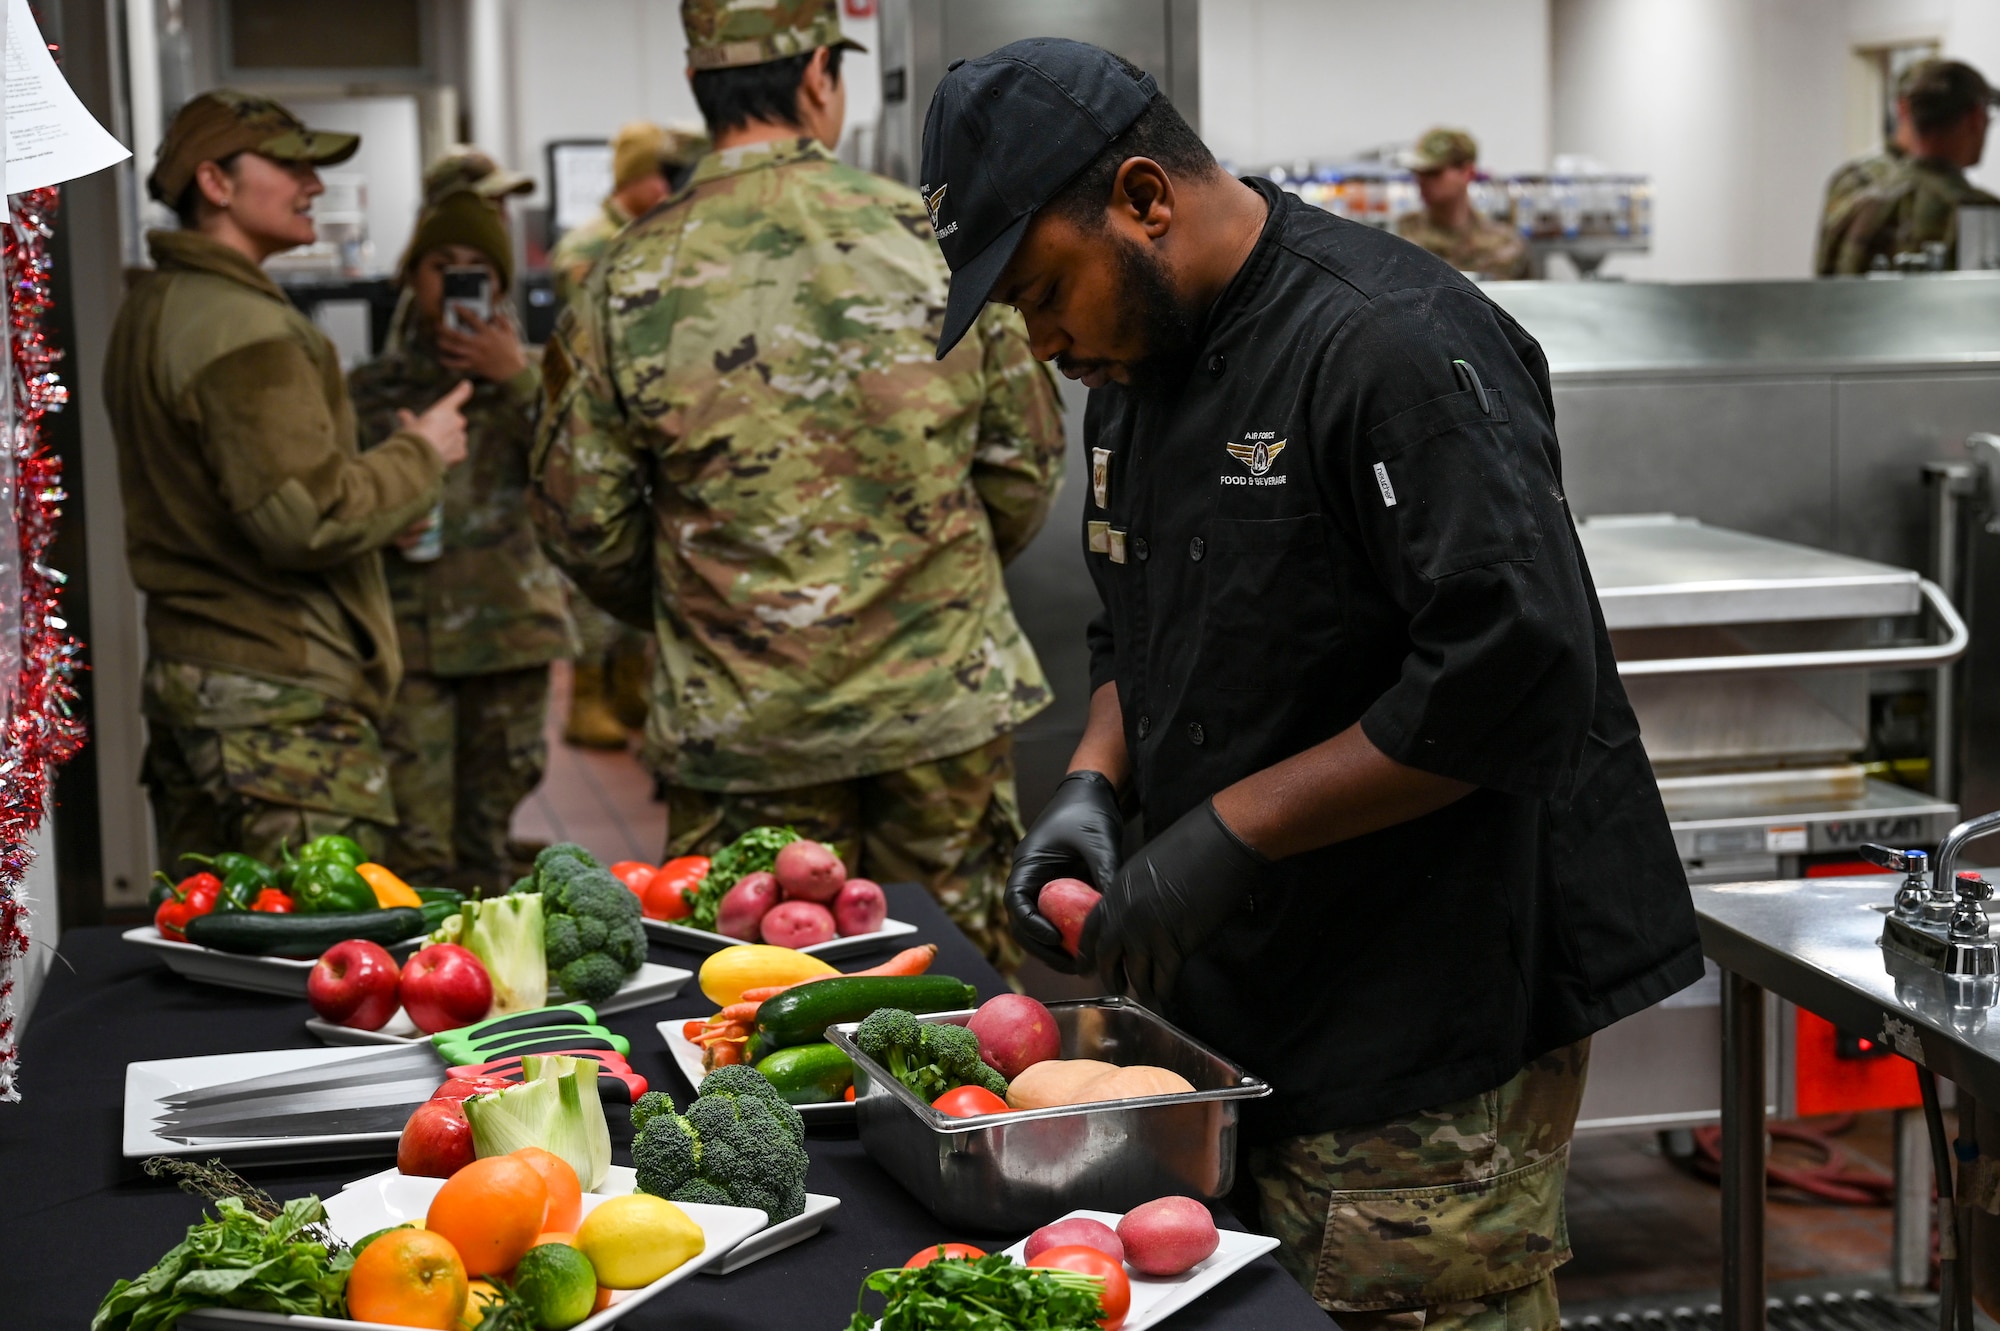 An Airman selects vegetables to cook.